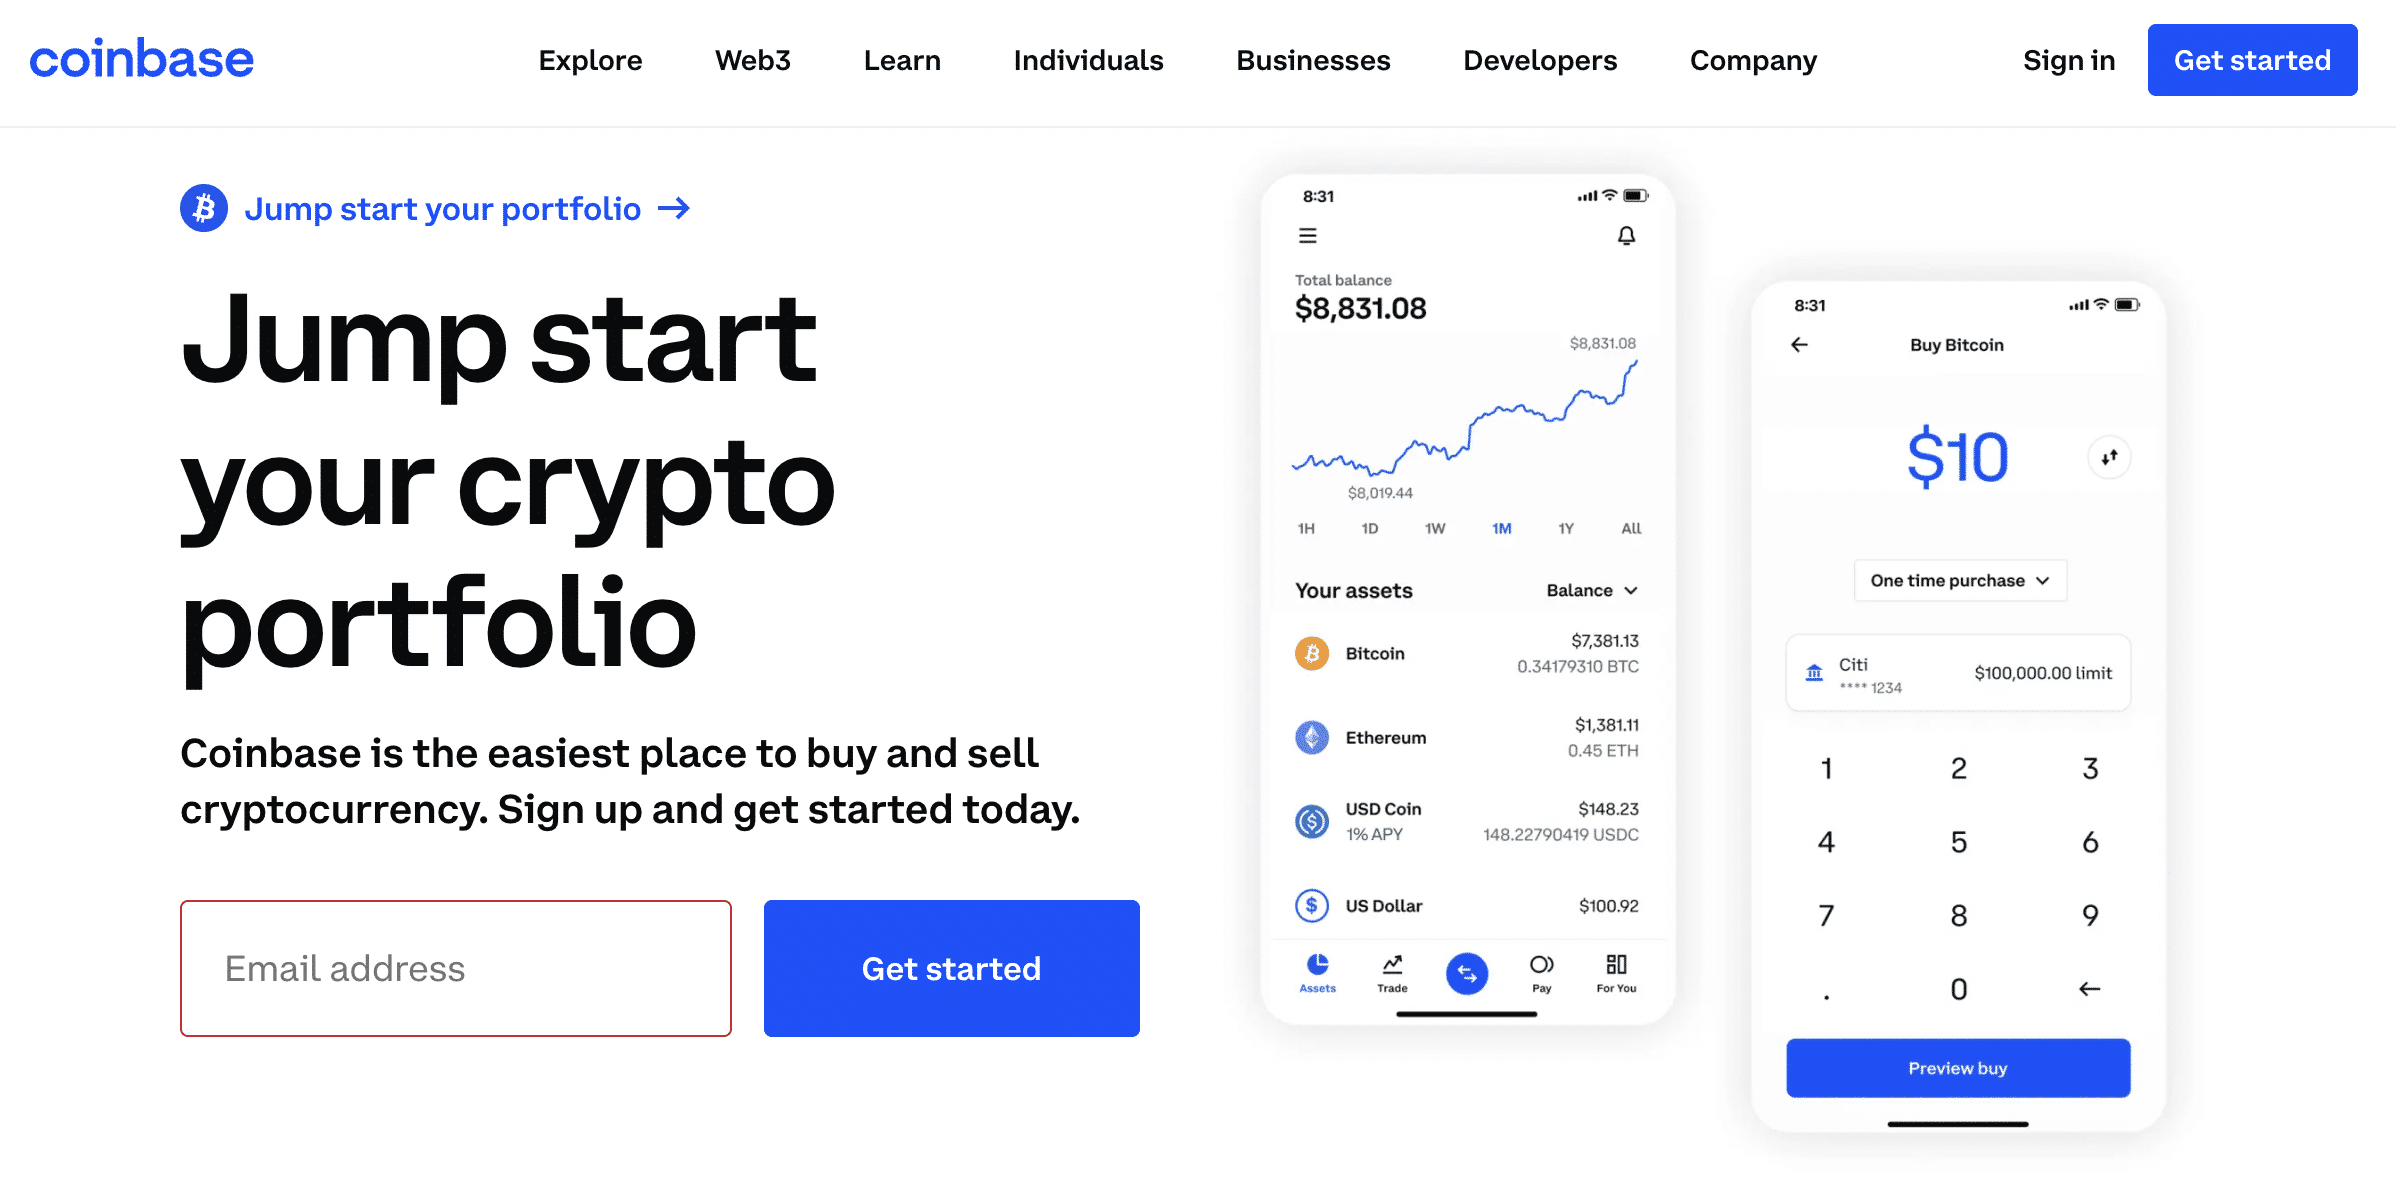 For those wondering where to buy cryptocurrency, Coinbase stands as a reliable and user-friendly platform with a broad range of available digital assets.